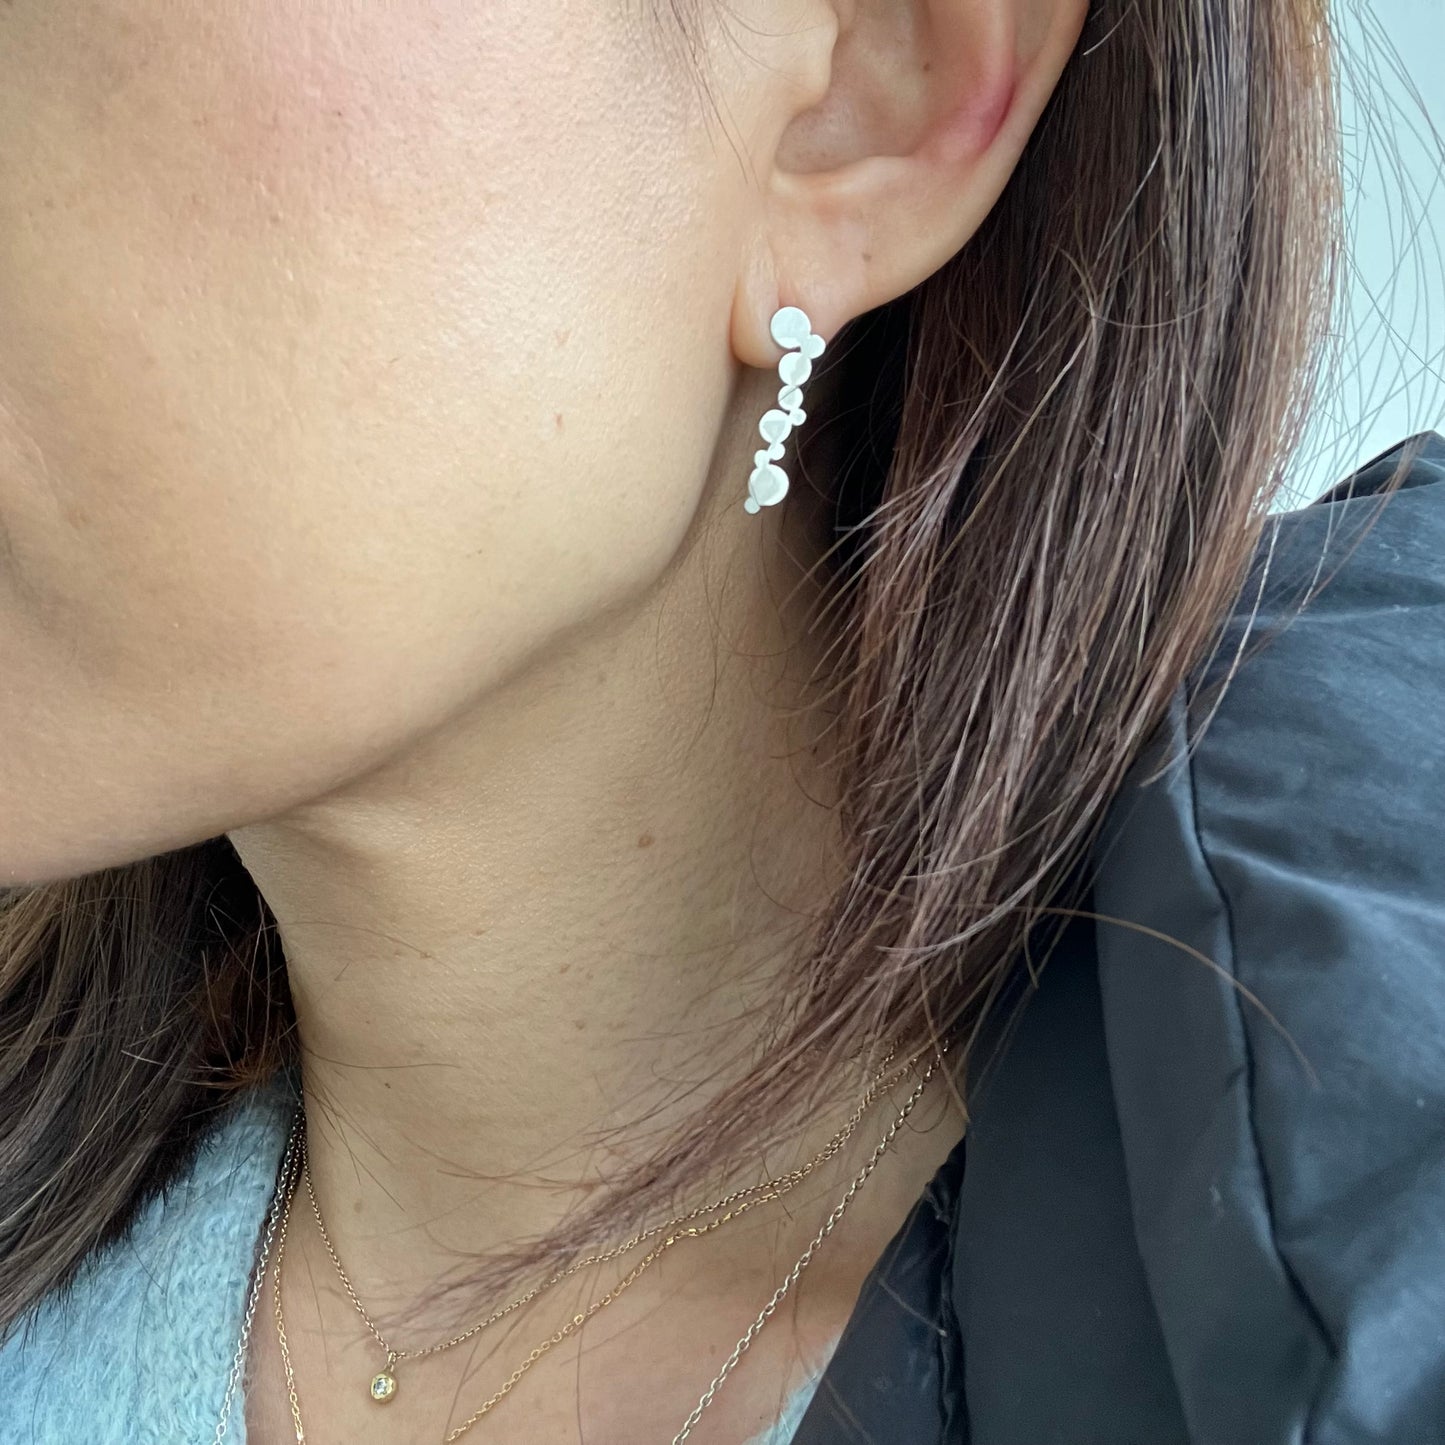 Medium Matte Finished Sterling Silver925 Bubble / Shower Stud Earring For Women シルバー バブルシャワー フロート 片耳ピアス